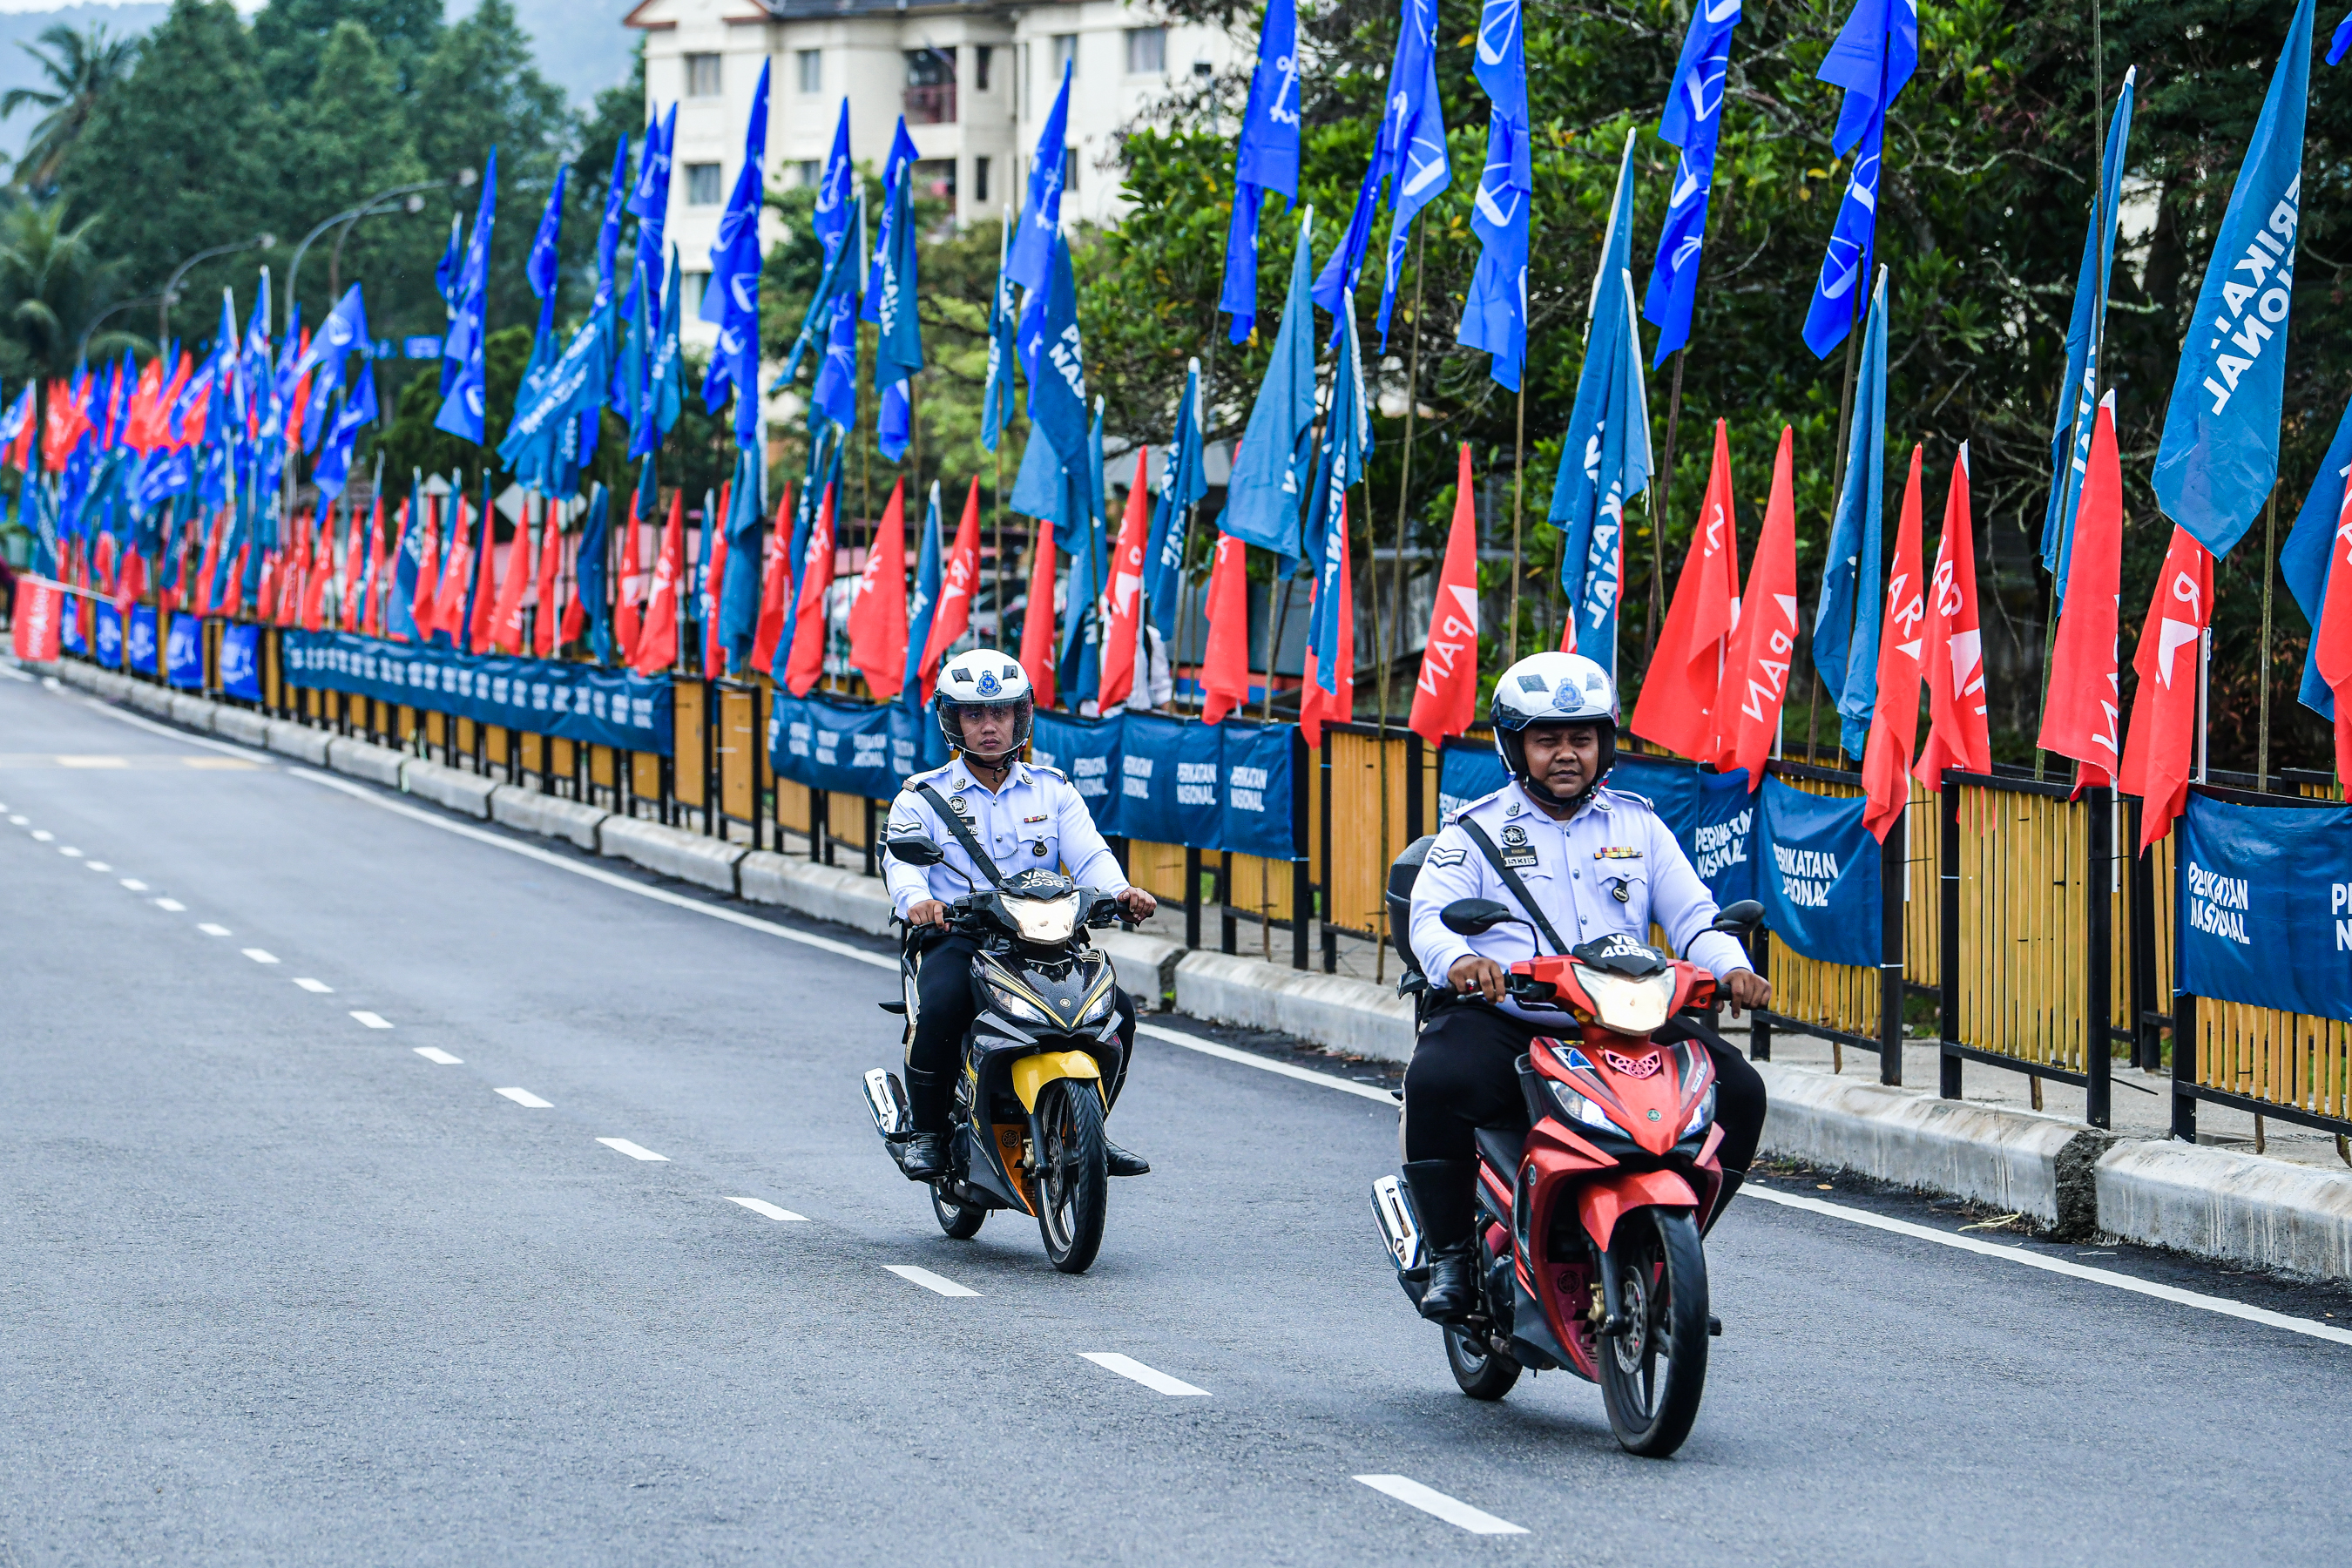 Party flags and banners in Gombak on Nov 19. (Zahid Izzani/The Edge)